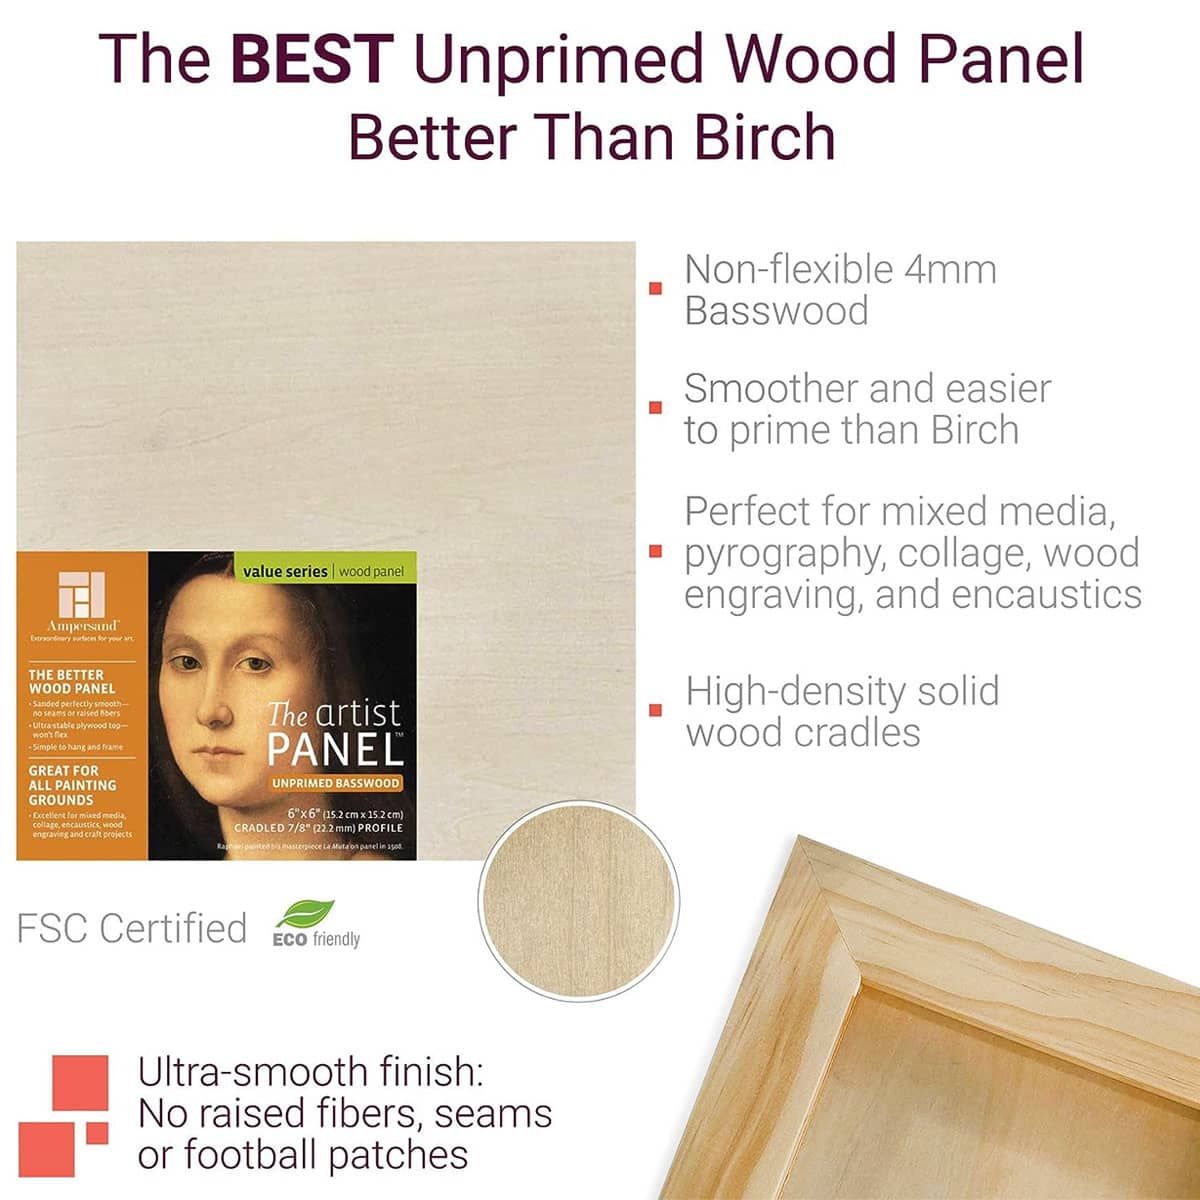 Basswood is a premium, select wood: outperforms birch plywood in many ways